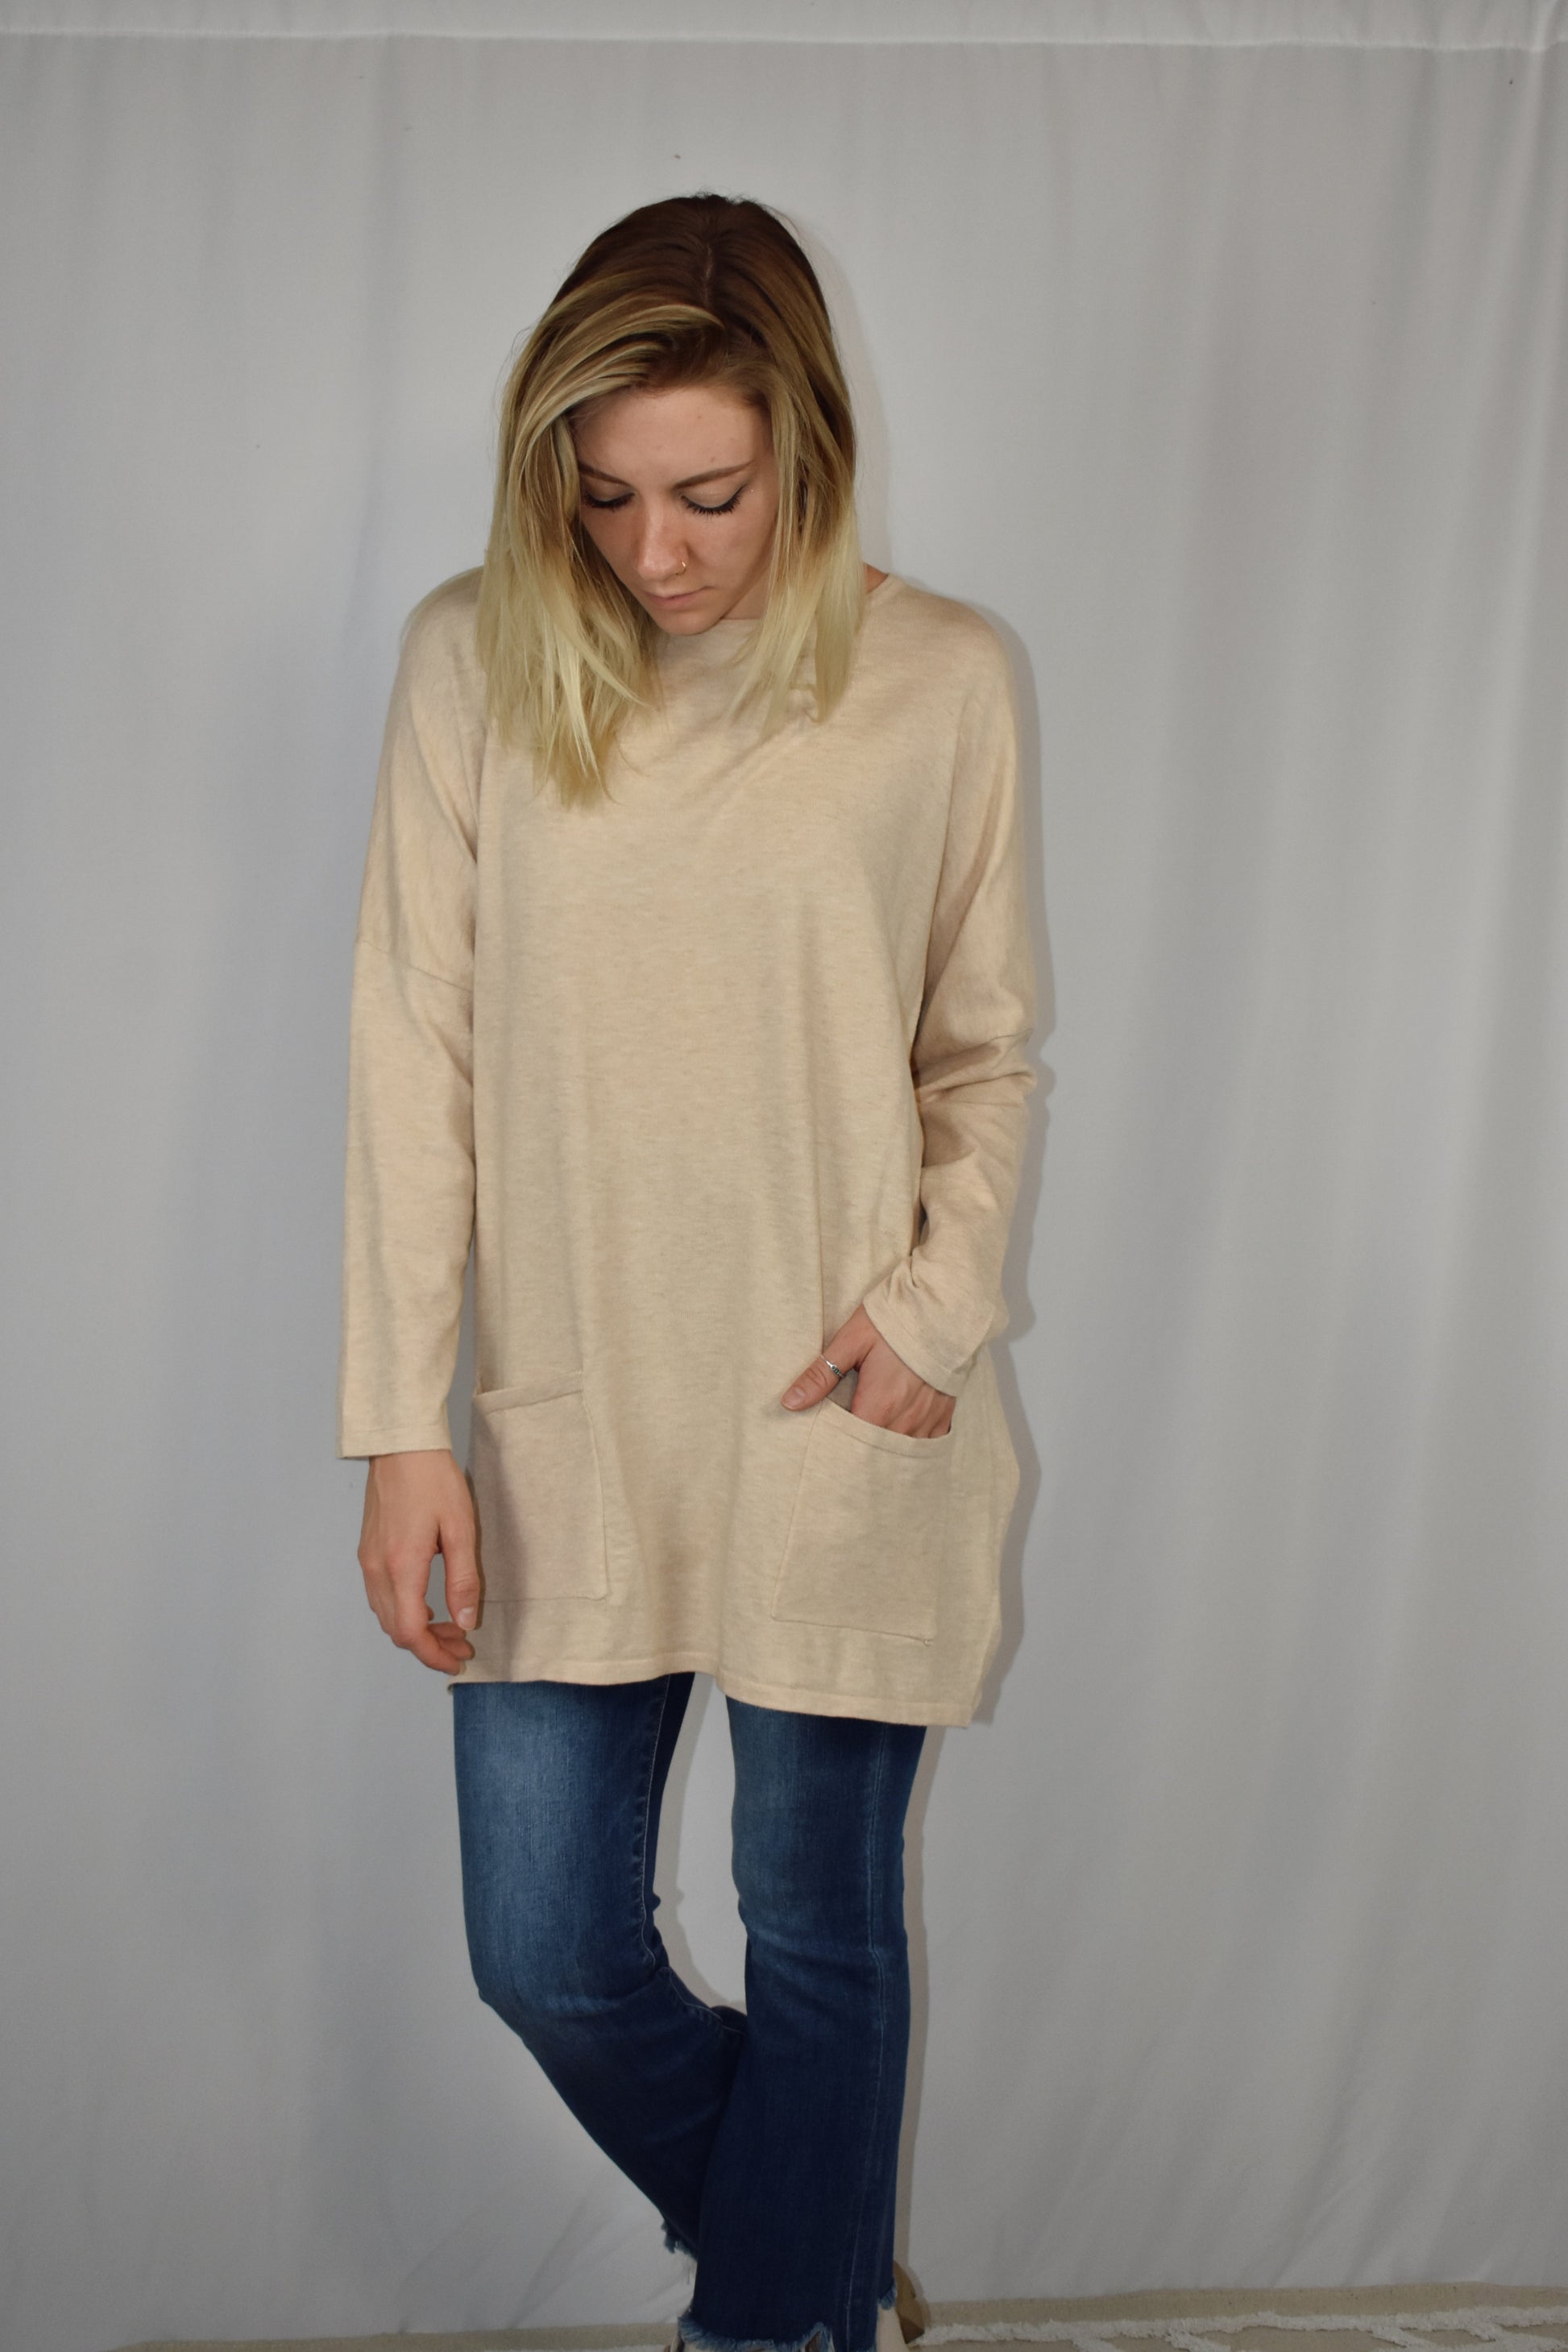 Oversized oatmeal colored sweater, lightweight fabric, scoop neck, front patch pockets, drop shoulders.